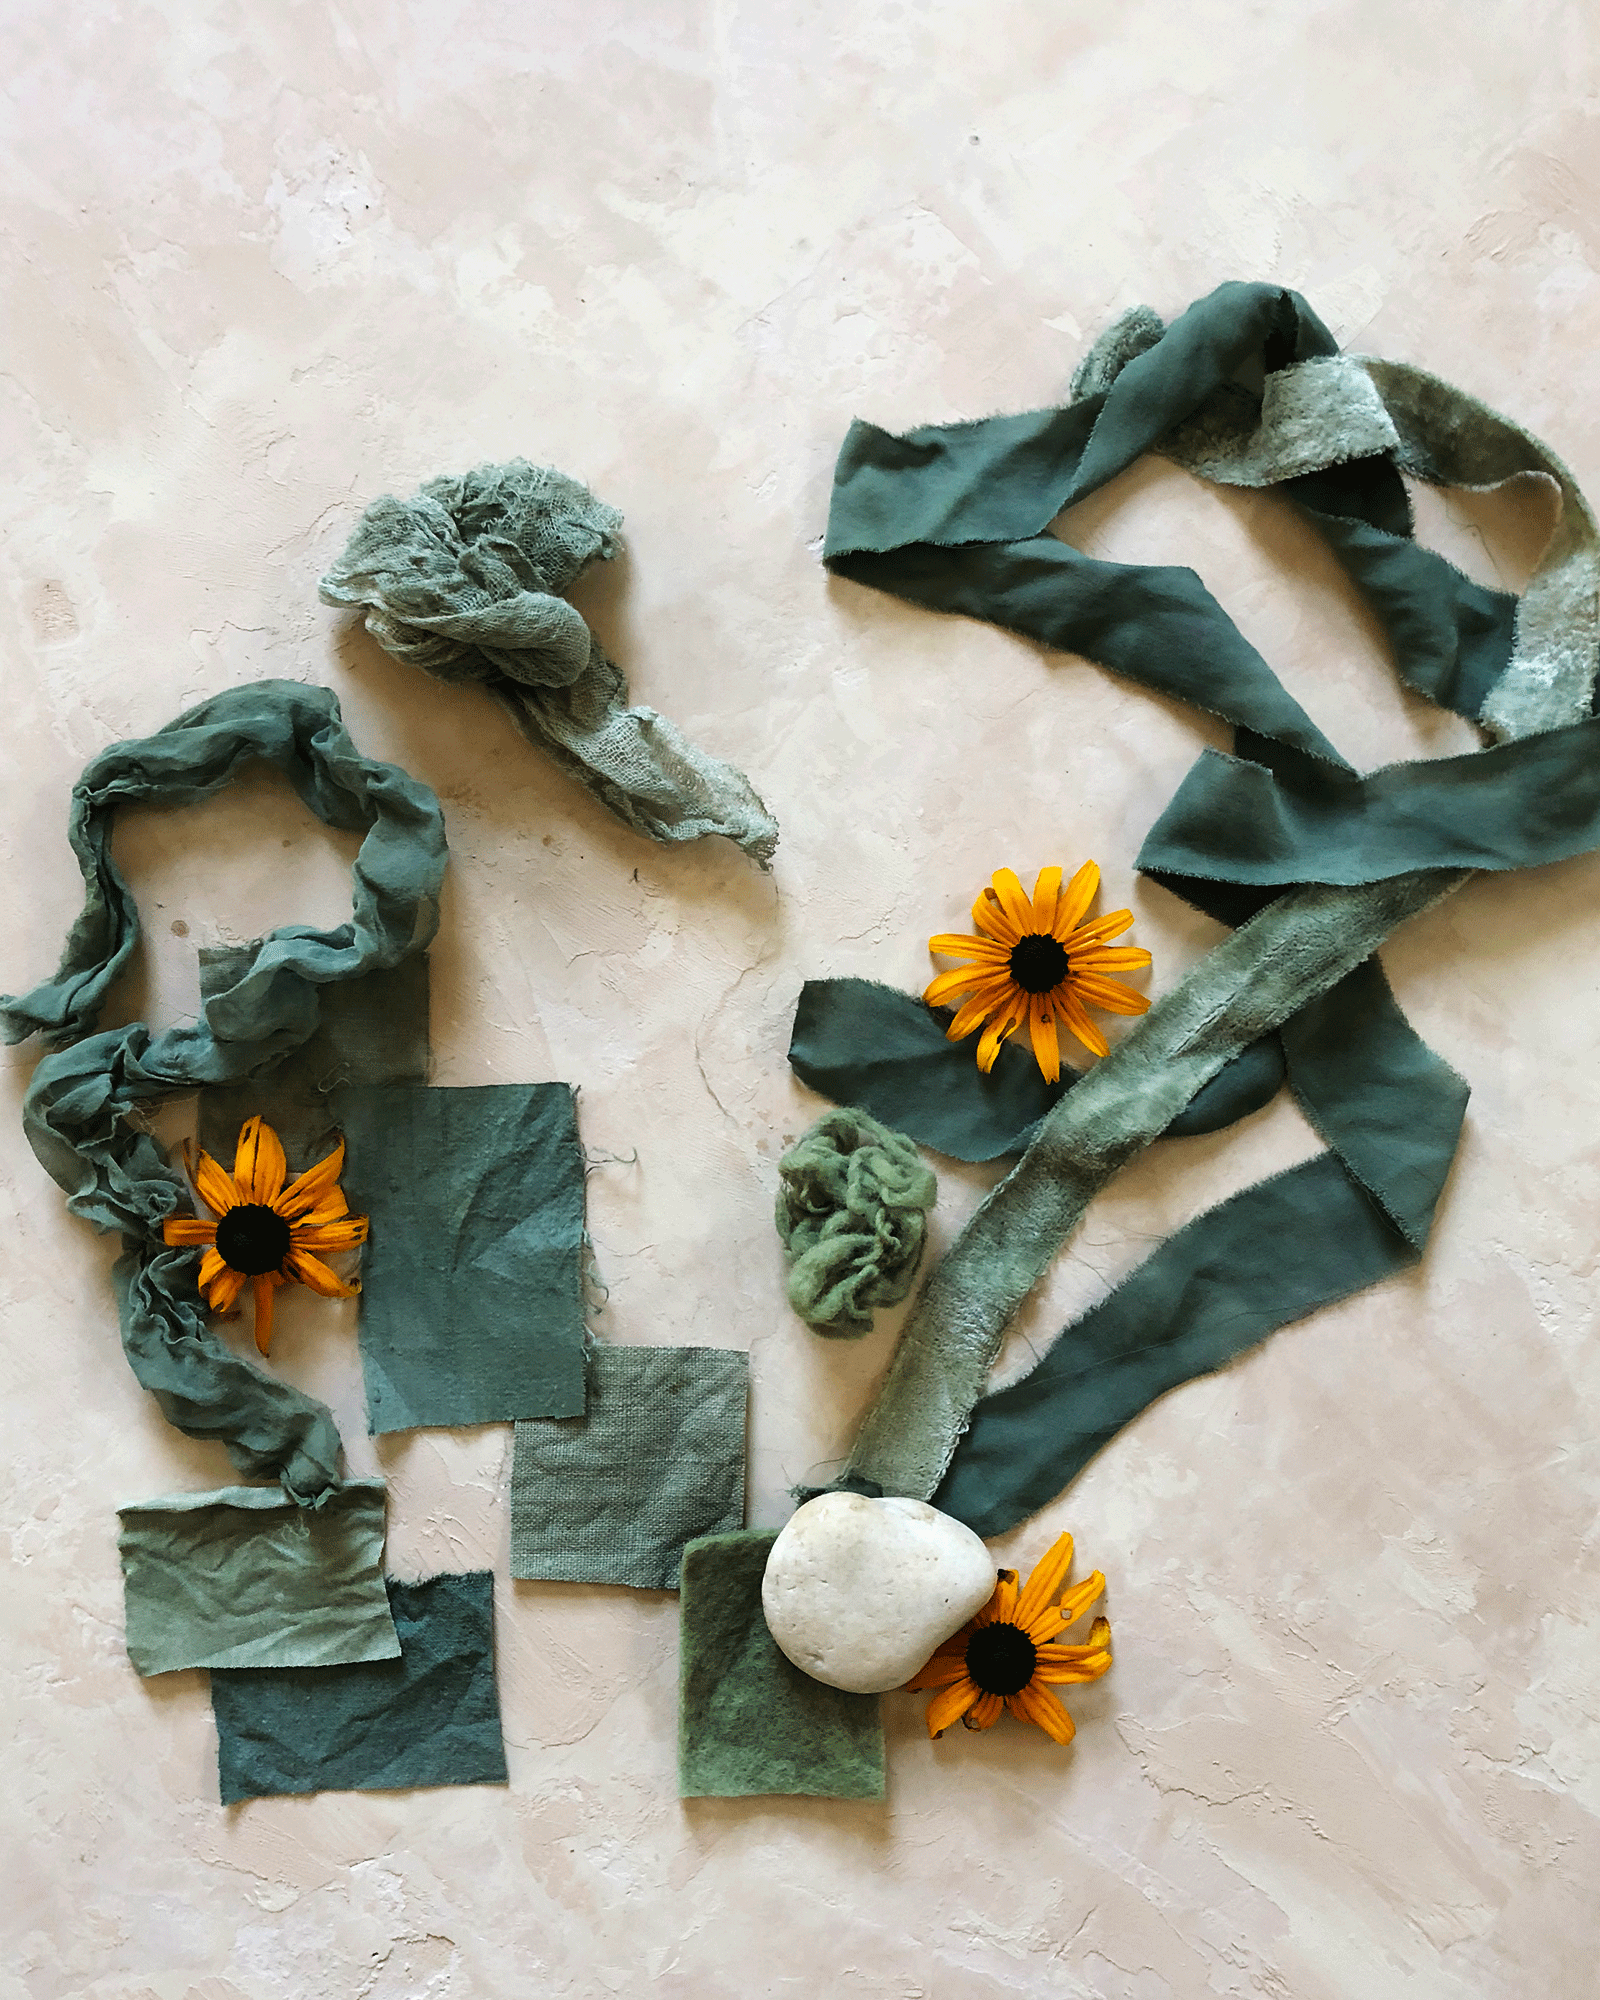 Natural Dyeing Workshop with Maggie Pate, Pigment from Petals